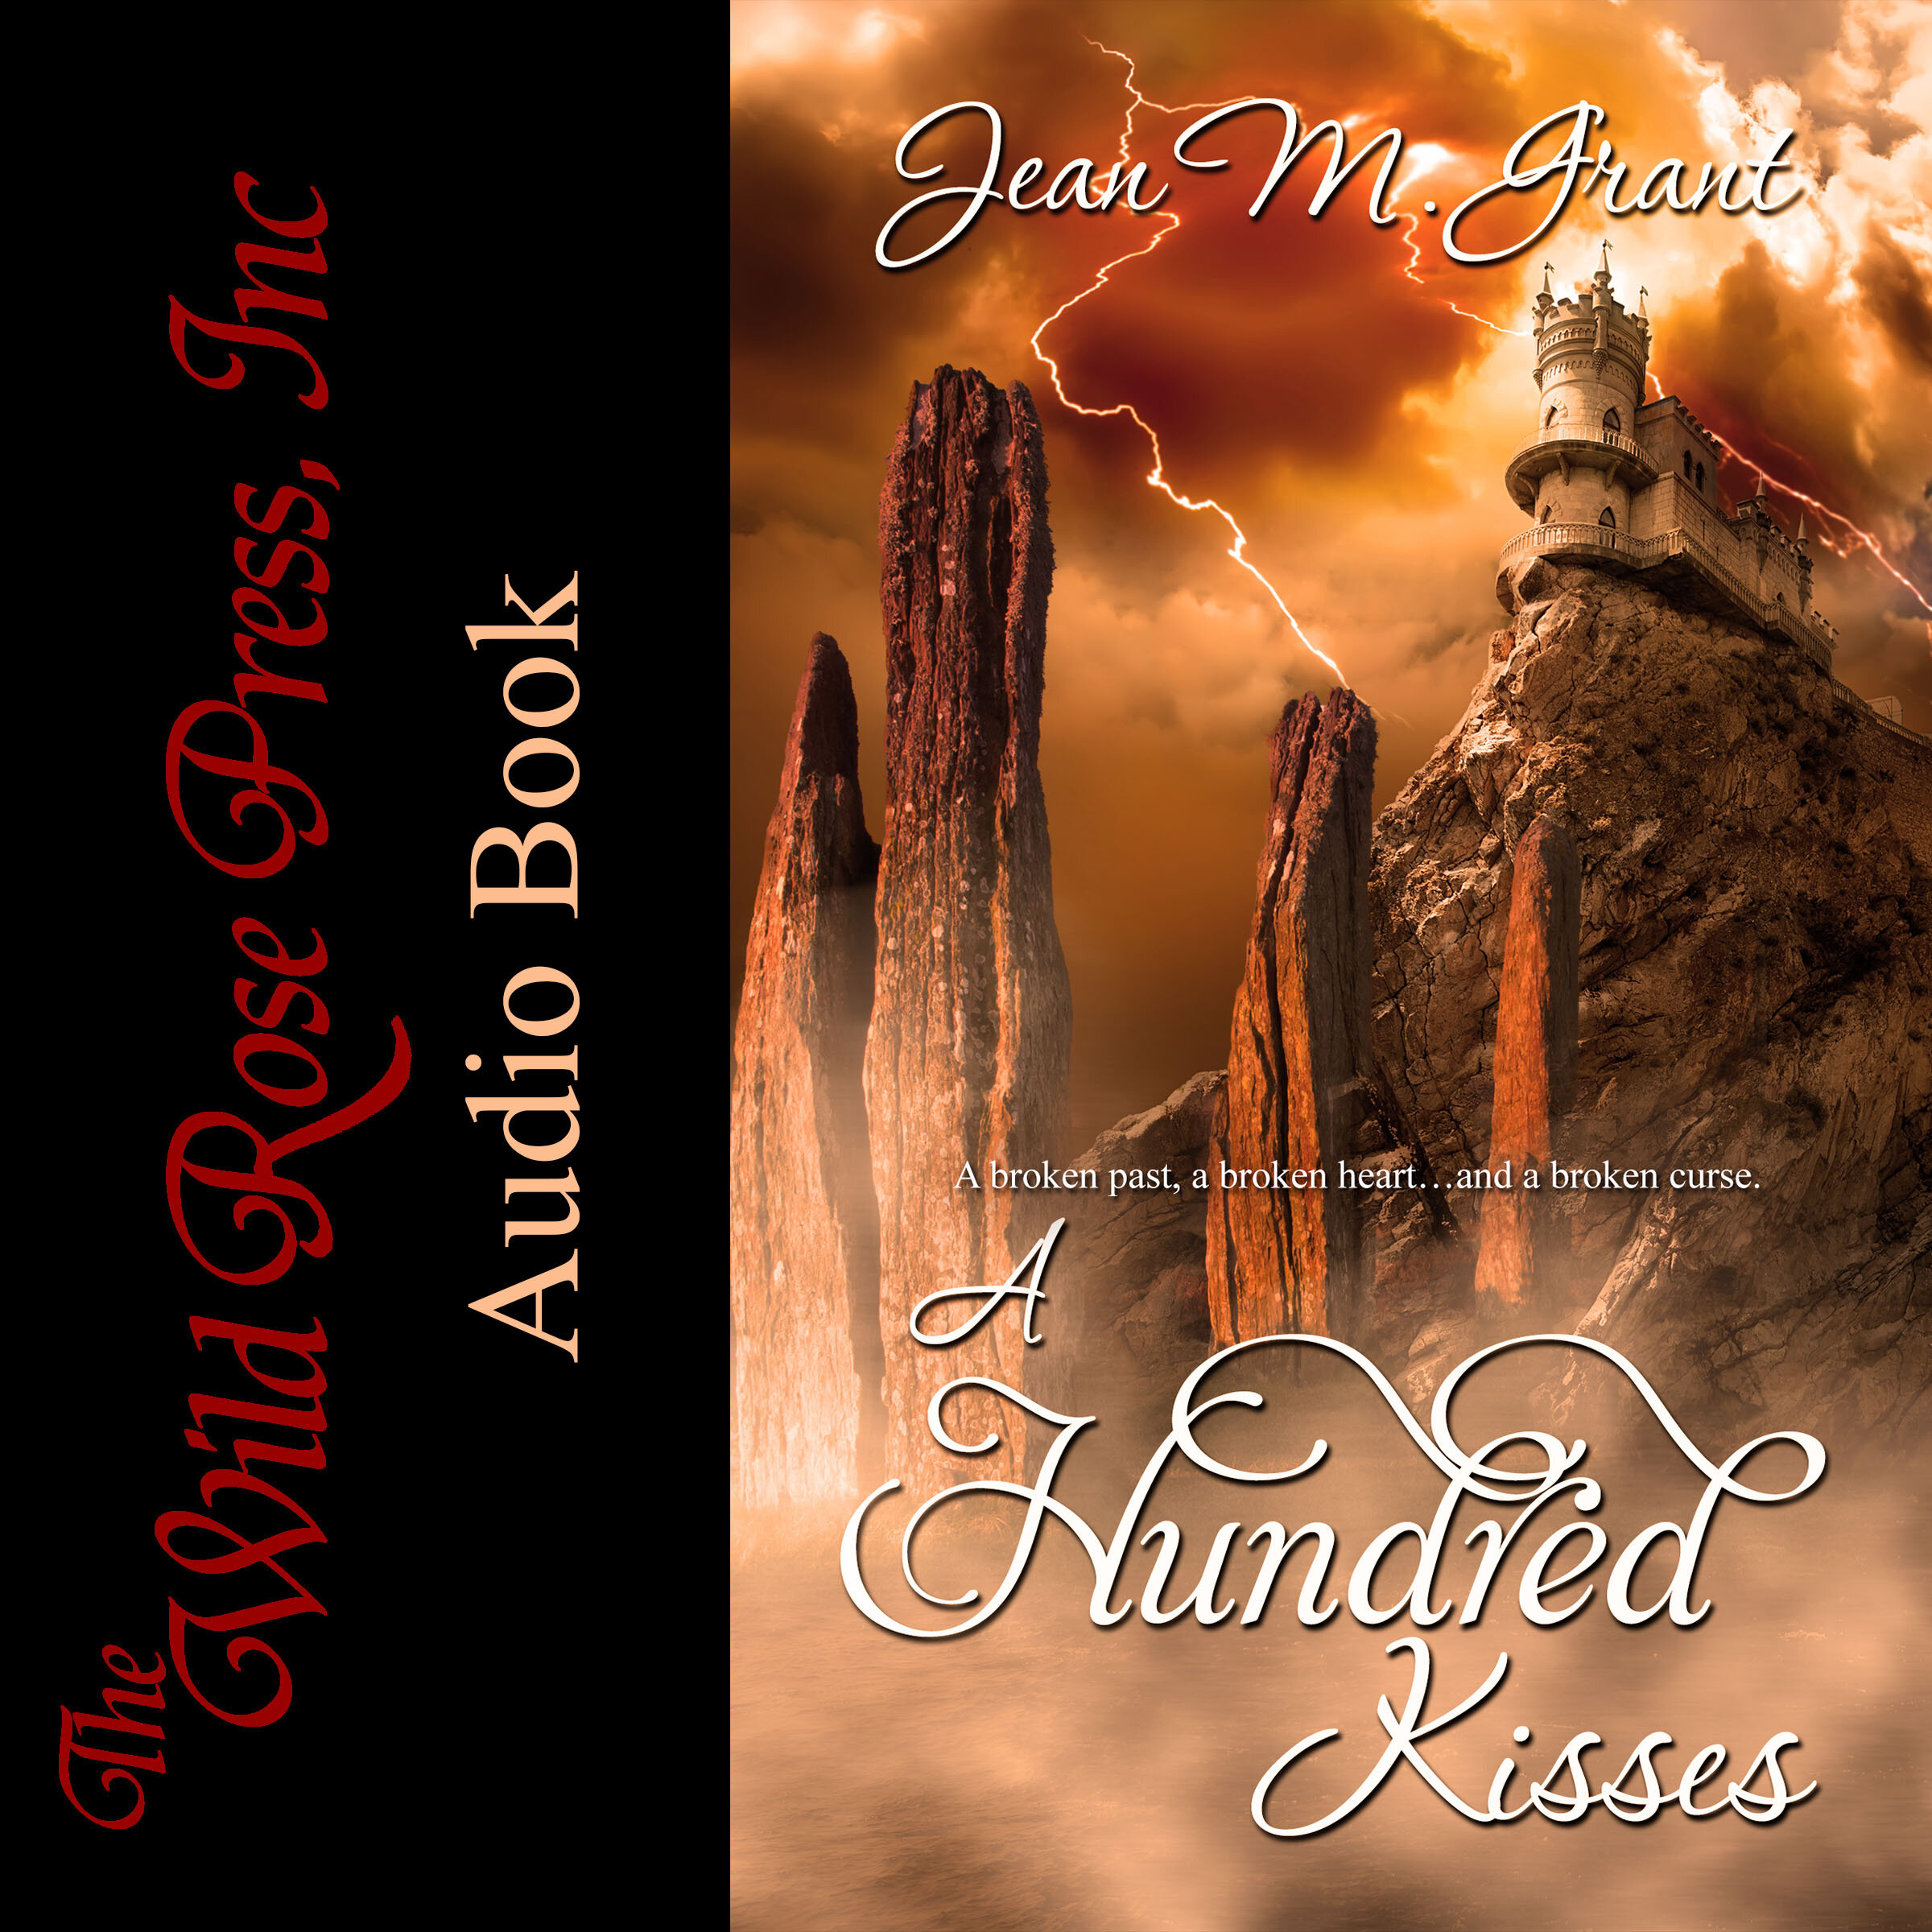 AHundredKisses_w11211_2400 AUDIO cover.jpg